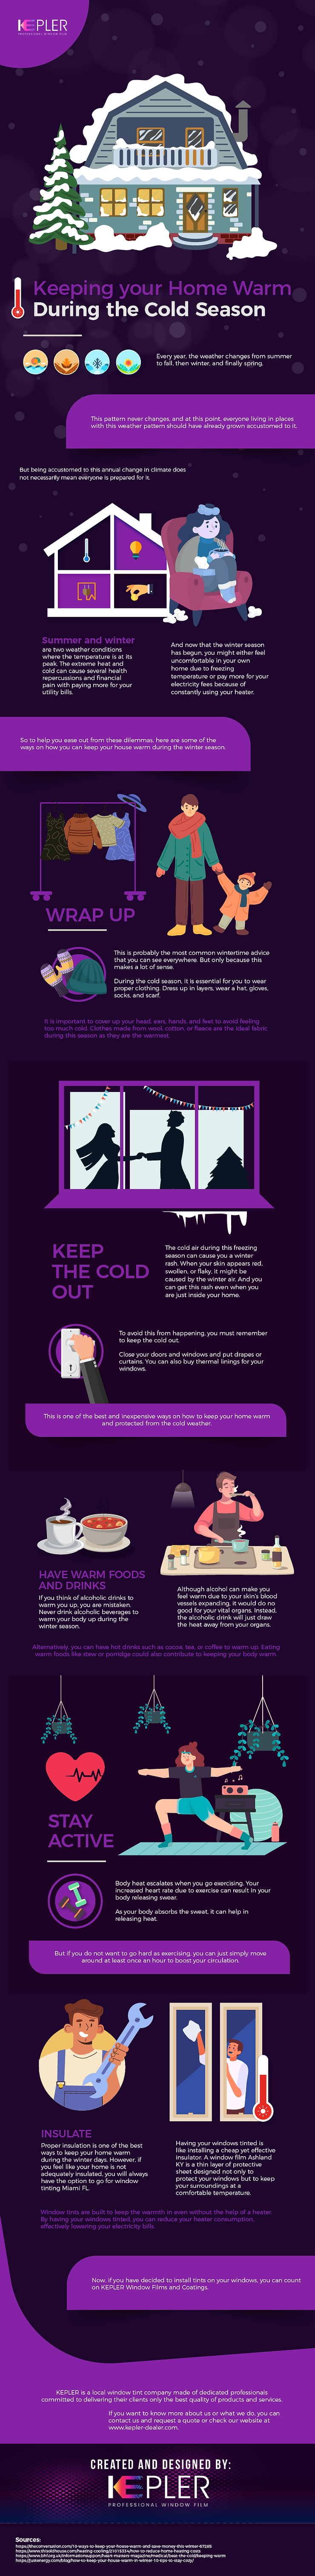 Keeping your Home Warm During the Cold Season - Infographic